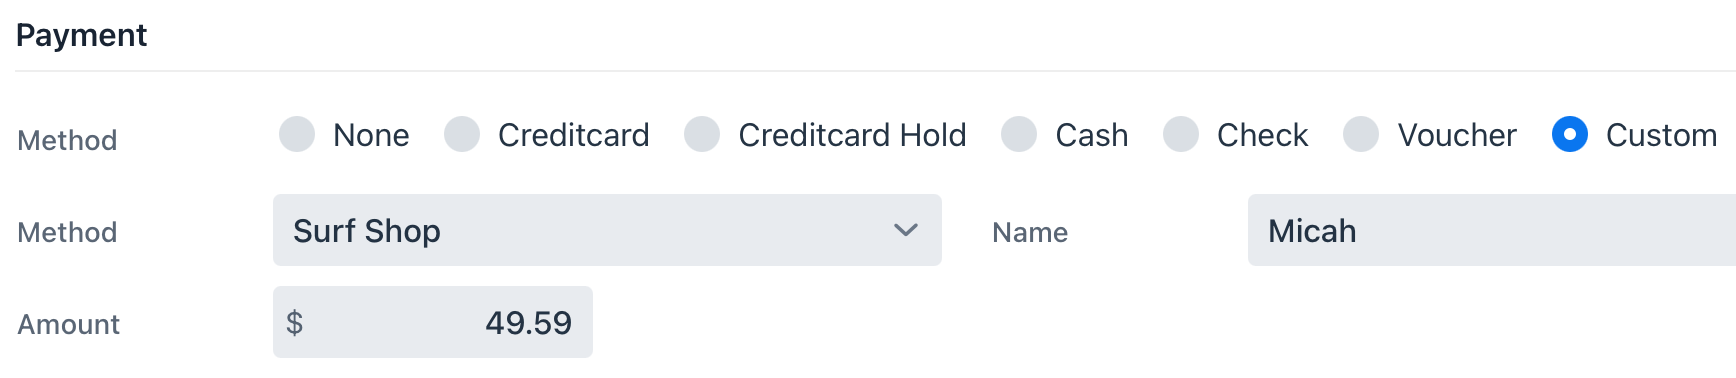 Custom_Payment_on_Booking.png